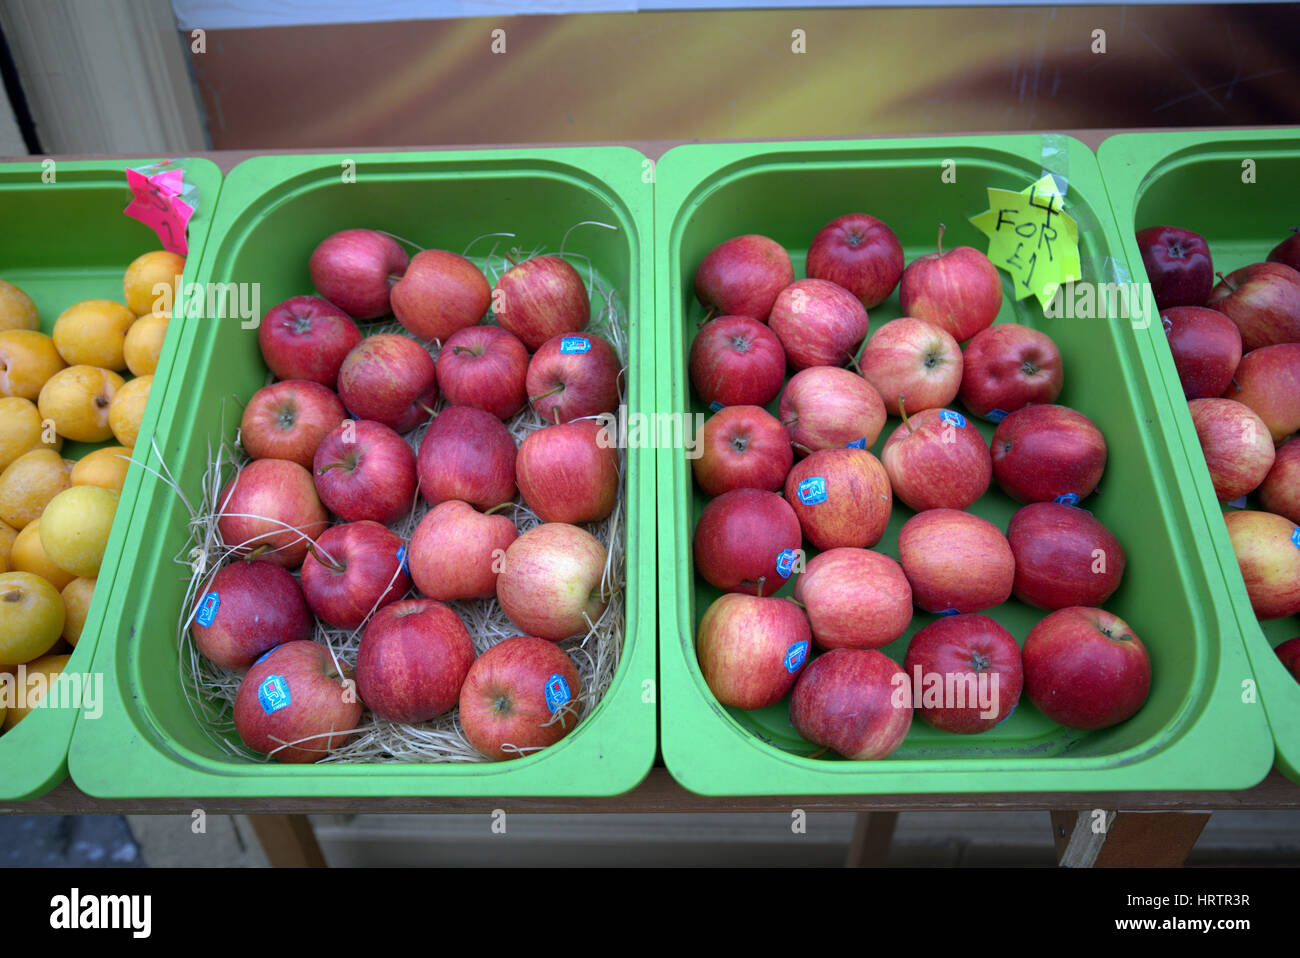 fruit and vegetable stall  red apples Stock Photo